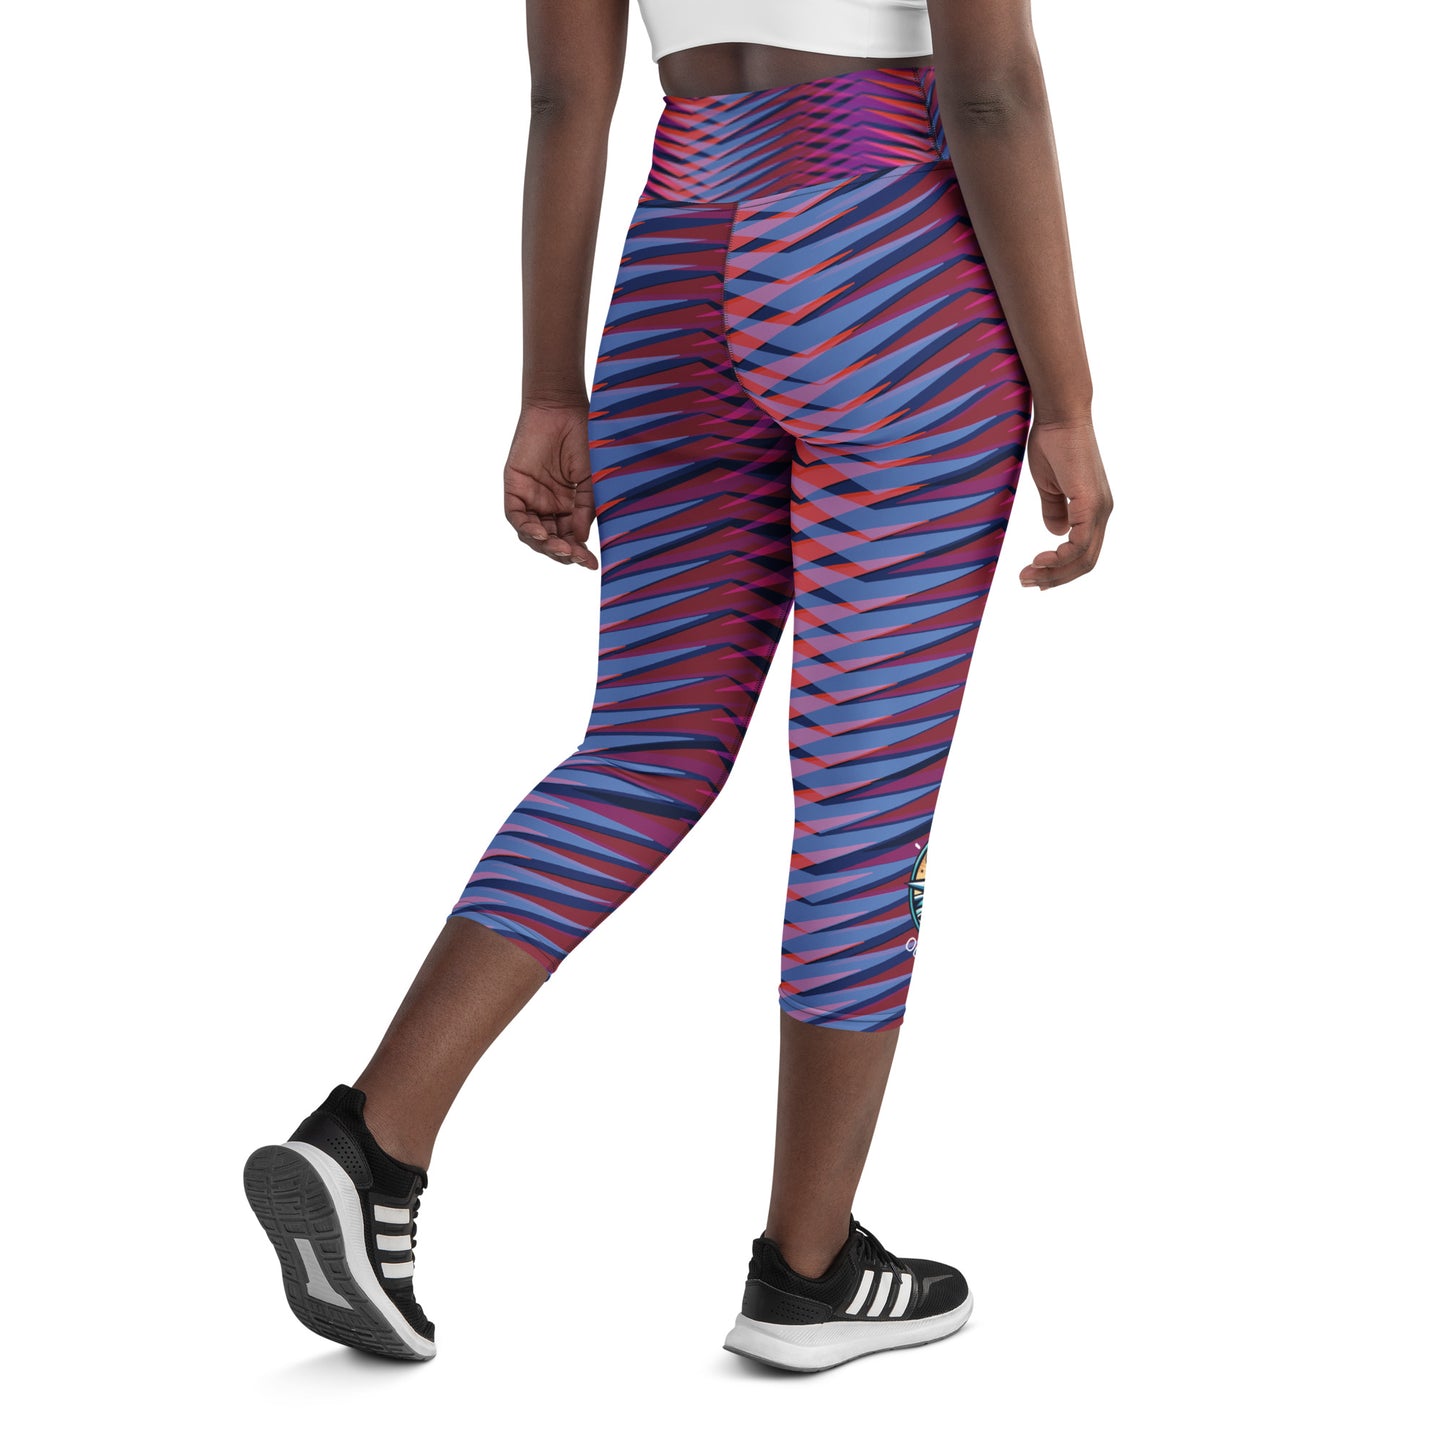 Purple and Pink Wave, Yoga Capri Leggings by Our BoatyVerse.